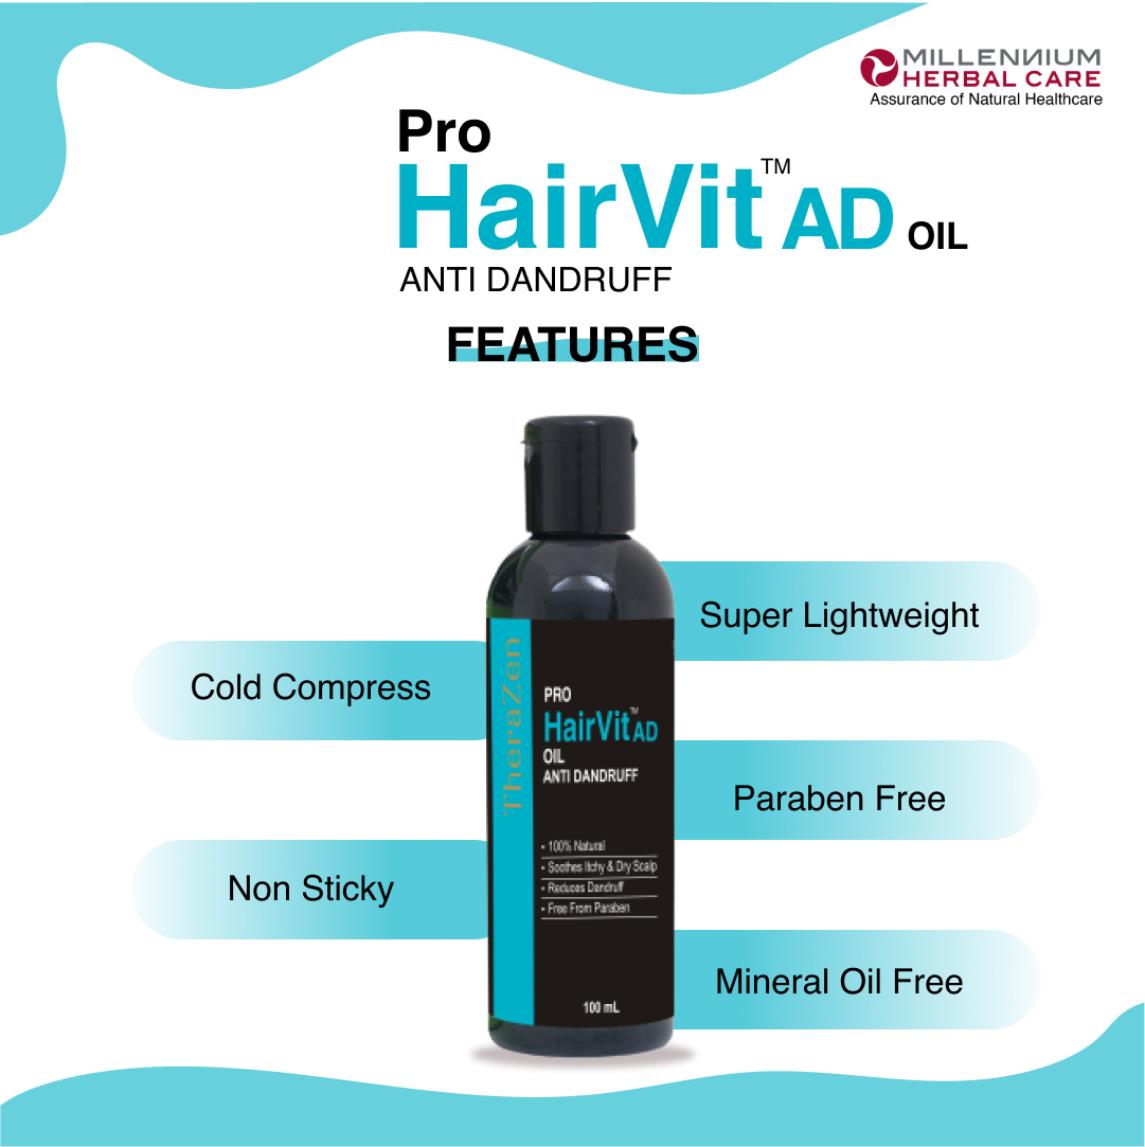 Millennium Herbal Care PRO HAIRVIT SHAMPOO  Nourishing  Revitalizing  Intensive Botanical Formula for Clean Hair  Scalp to Control Hair fall   Breakage  100 ml Pack of 2